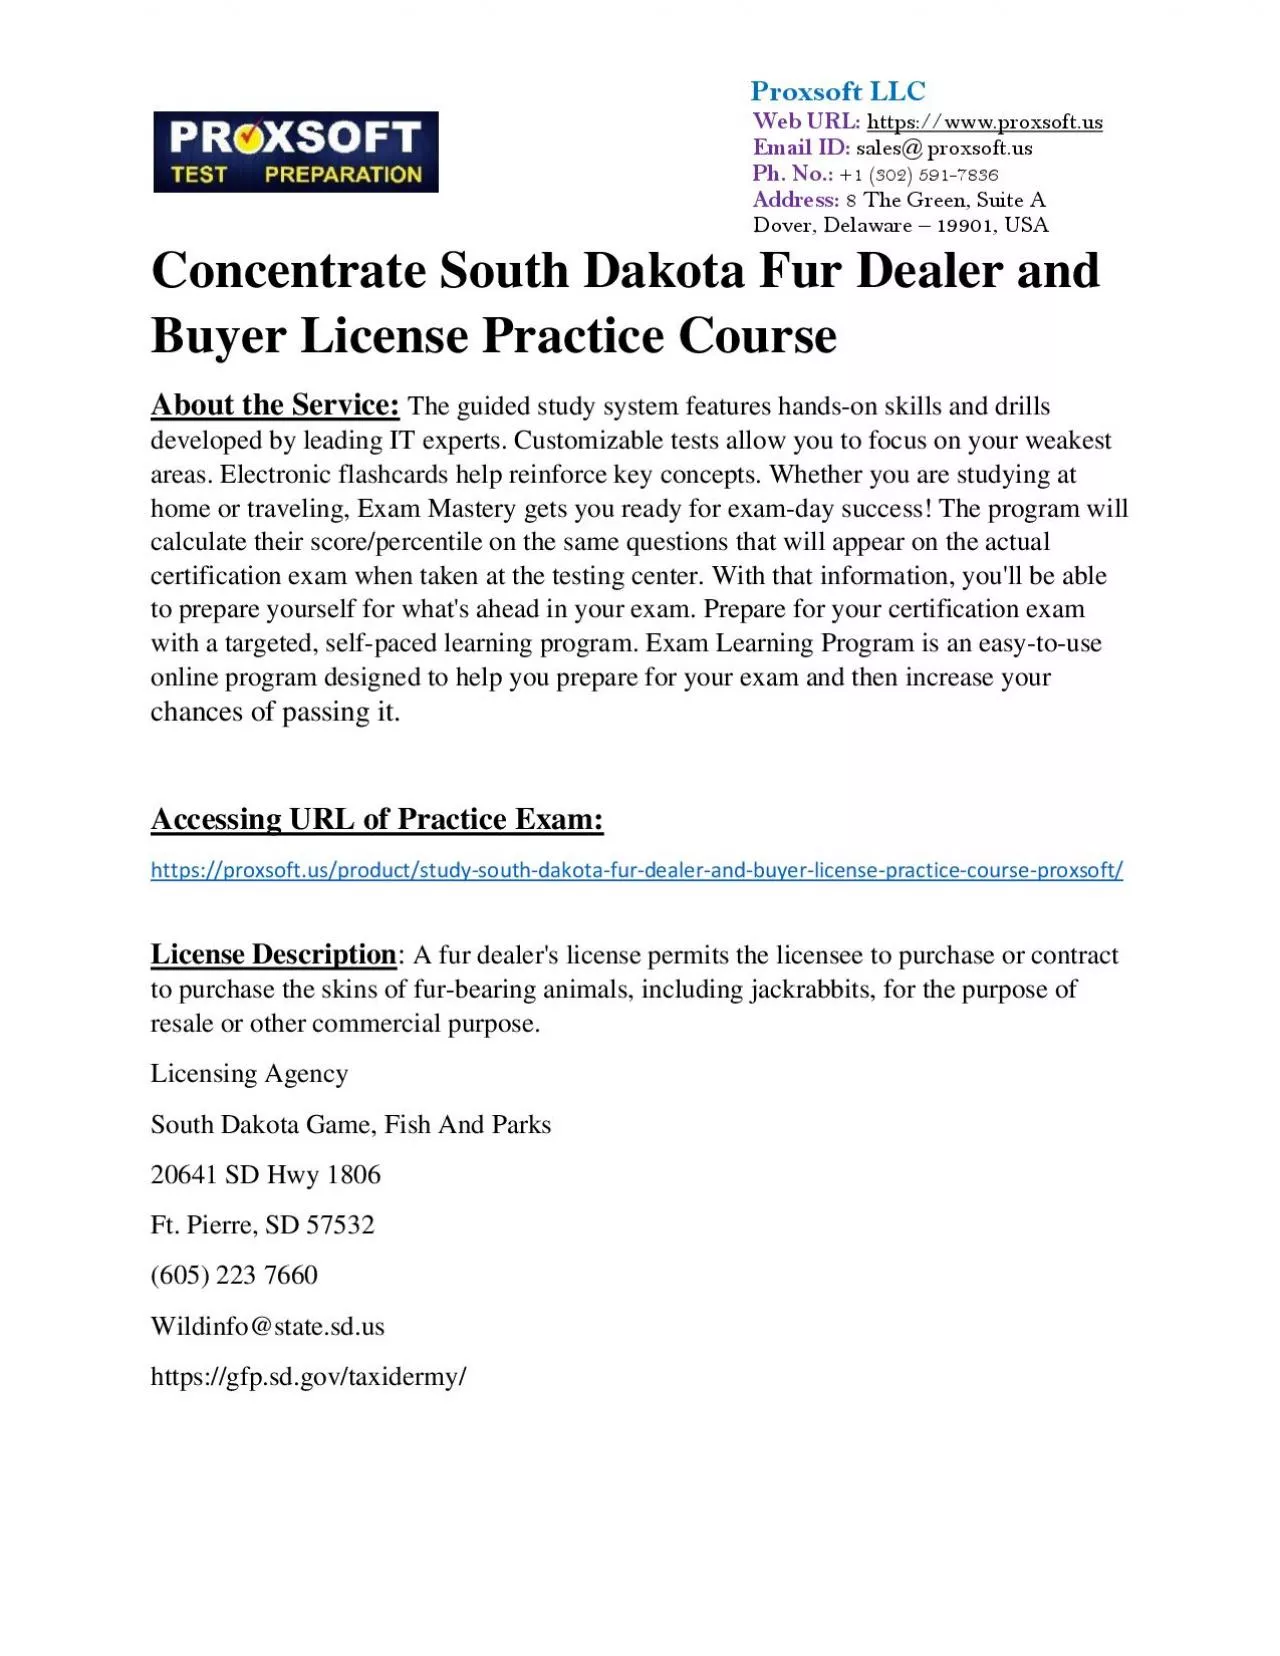 Concentrate South Dakota Fur Dealer and Buyer License Practice Course